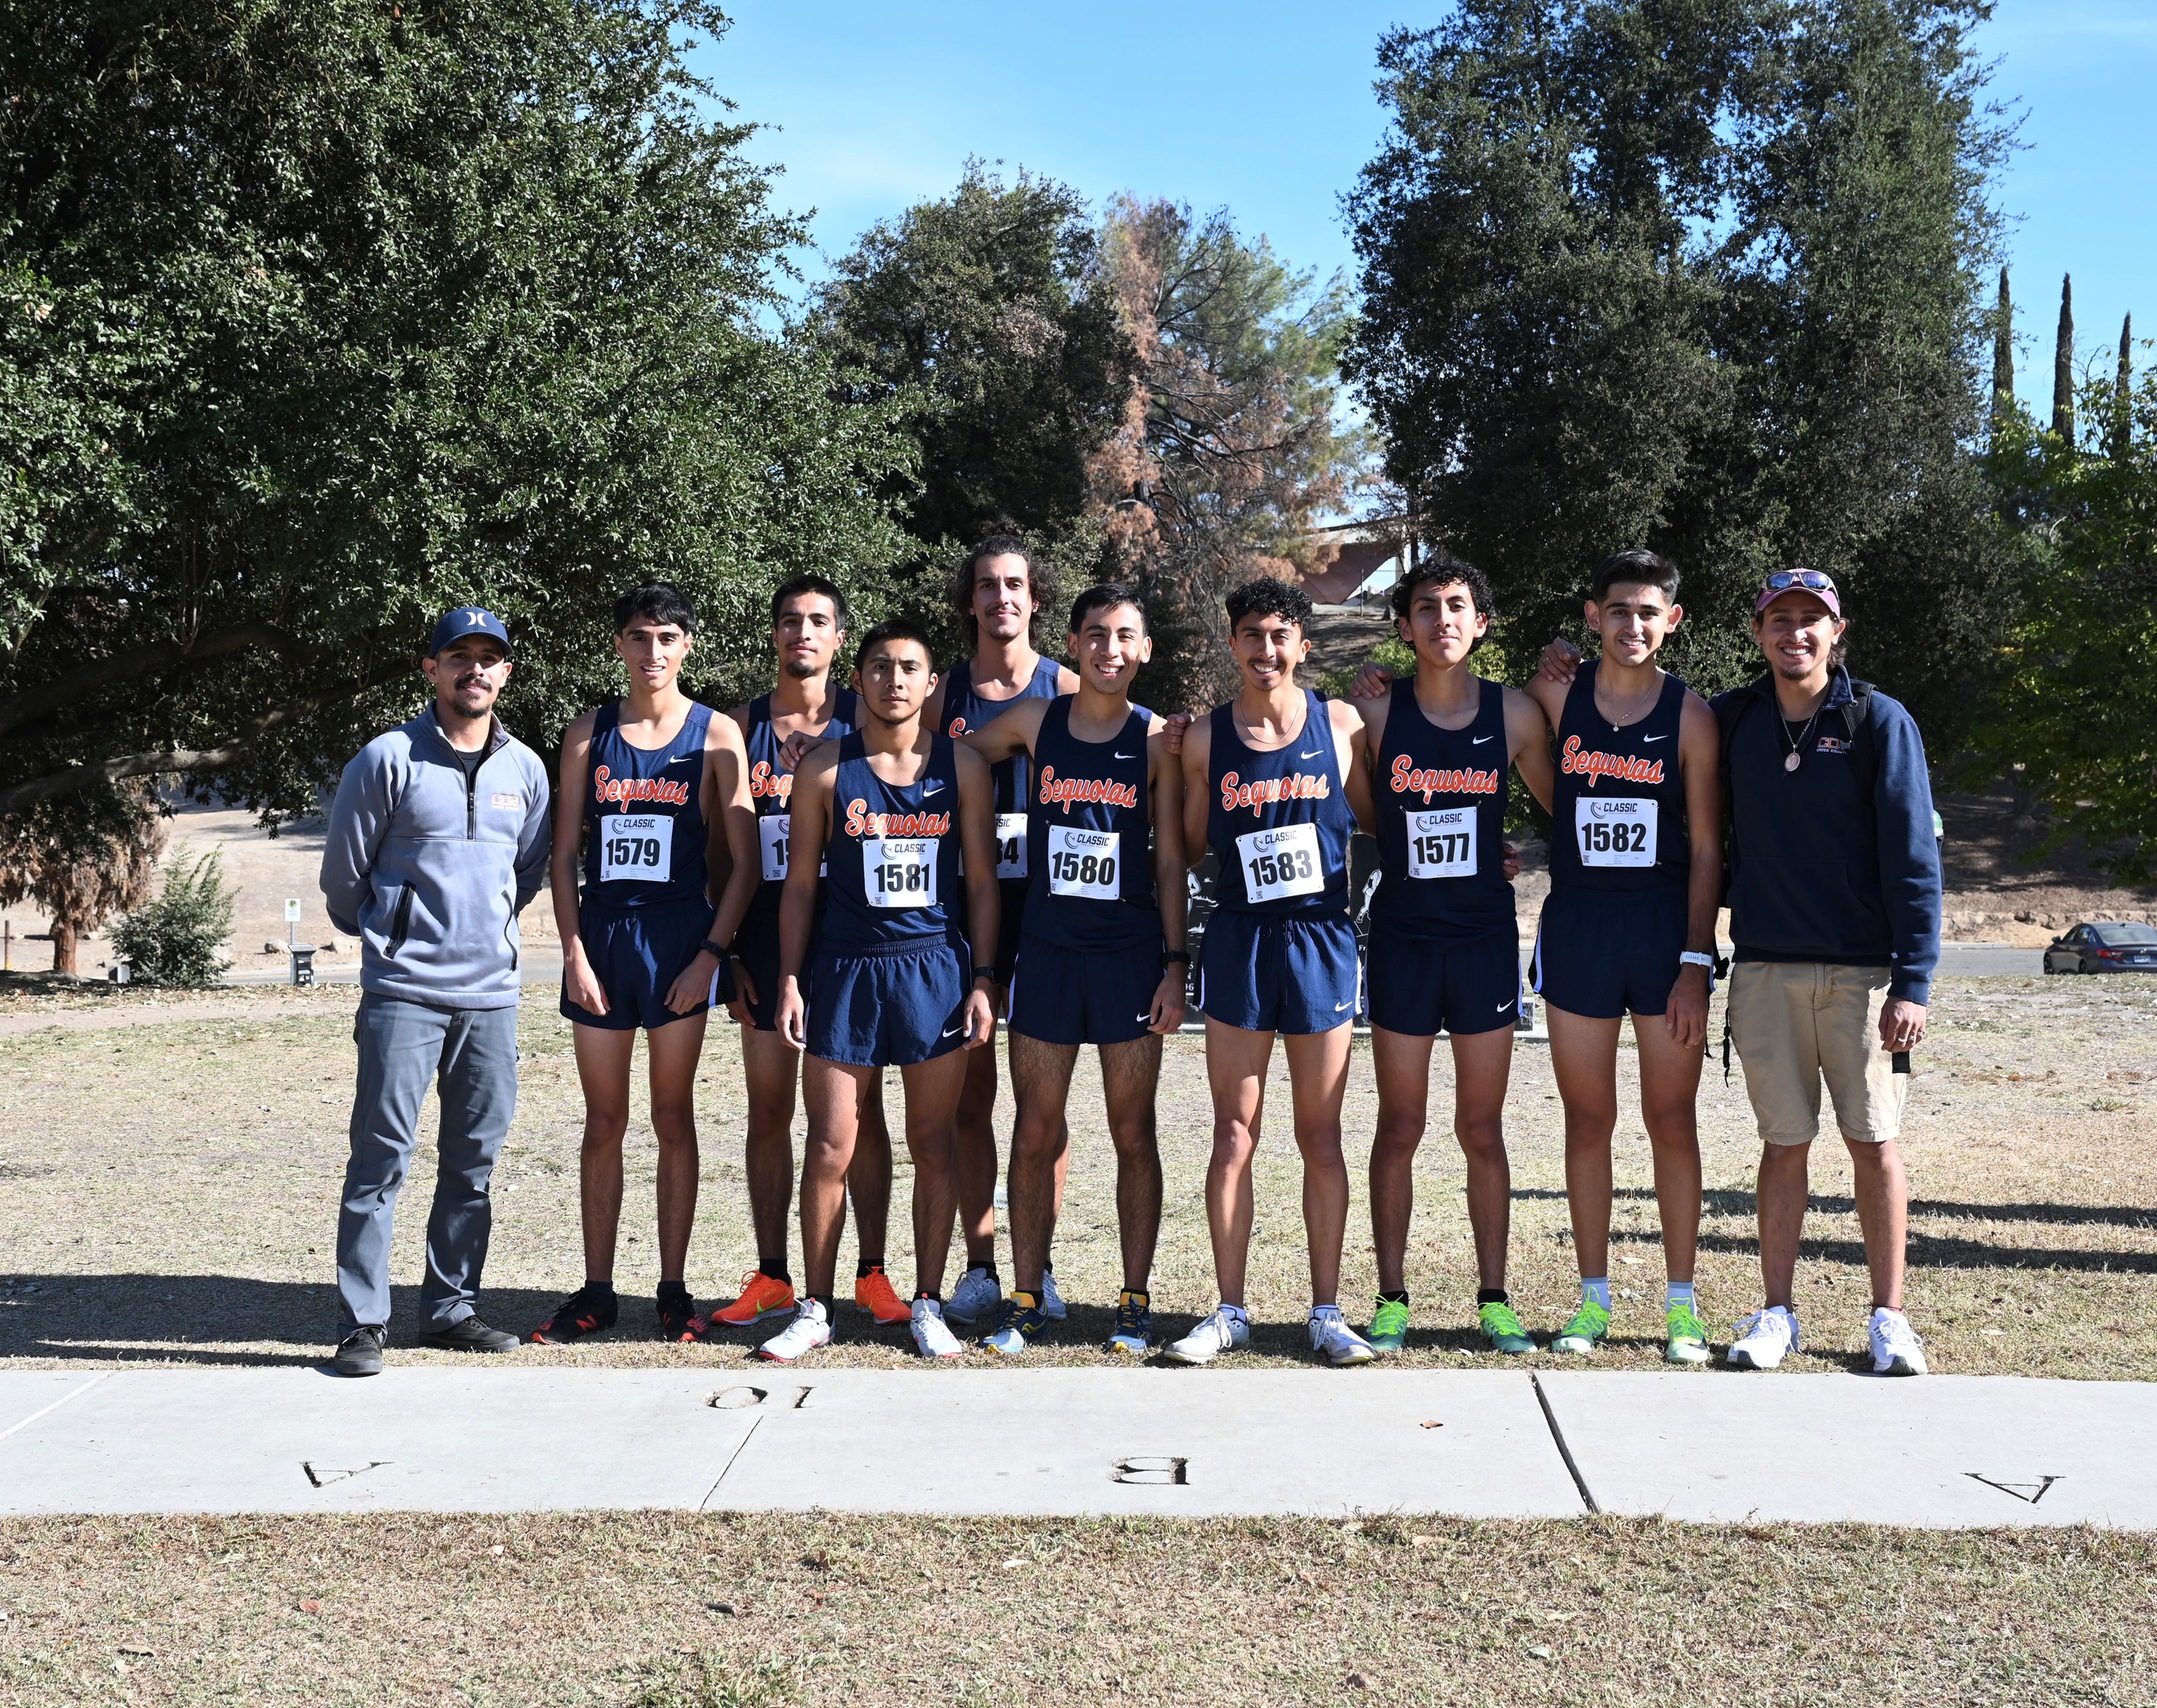 The COS Men's Cross Country team photo after winning the conference title at Woodward Park (10-26-22). Photo by Norma Foster